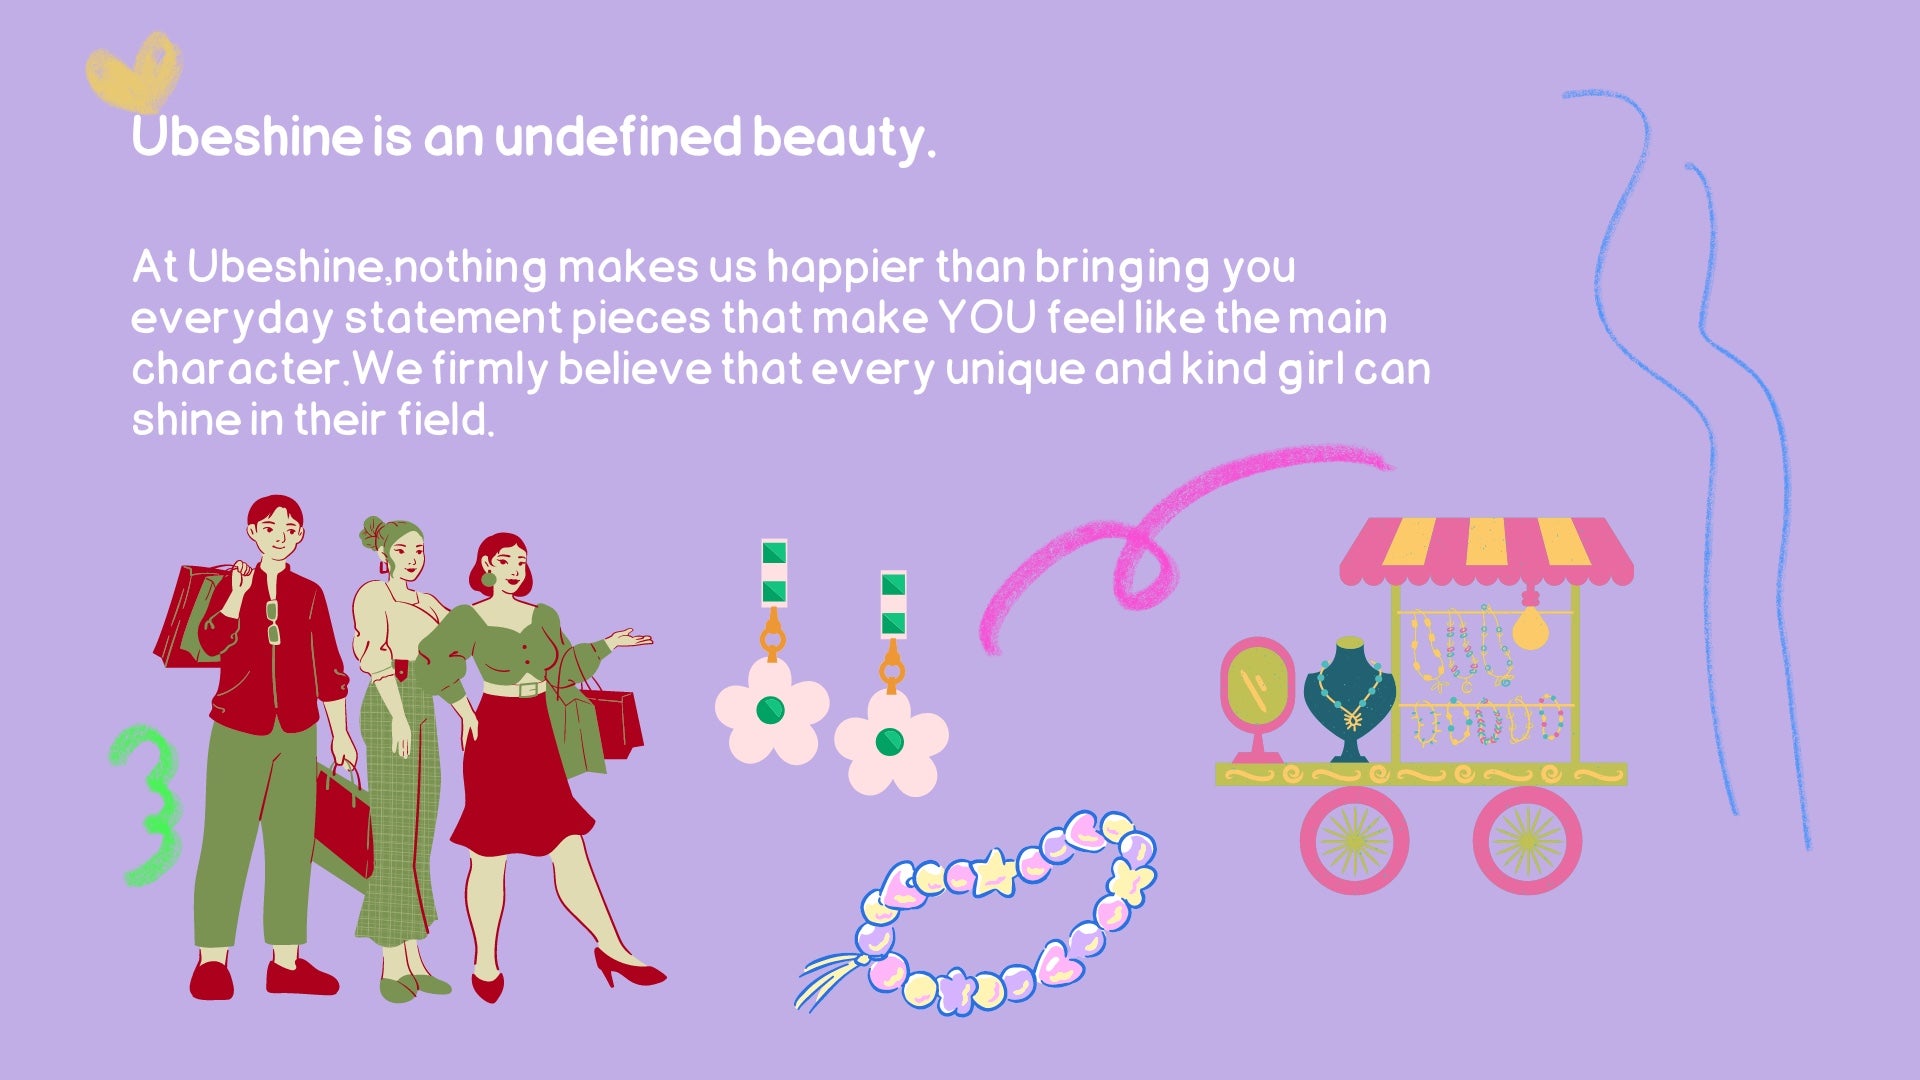 Ubeshine is an undefined beauty. At Ubeshine,nothing makes us happier than bringing you everyday statement pieces that make YOU feel like the main character.We firmly believe that every unique and kind girl can shine in their field.